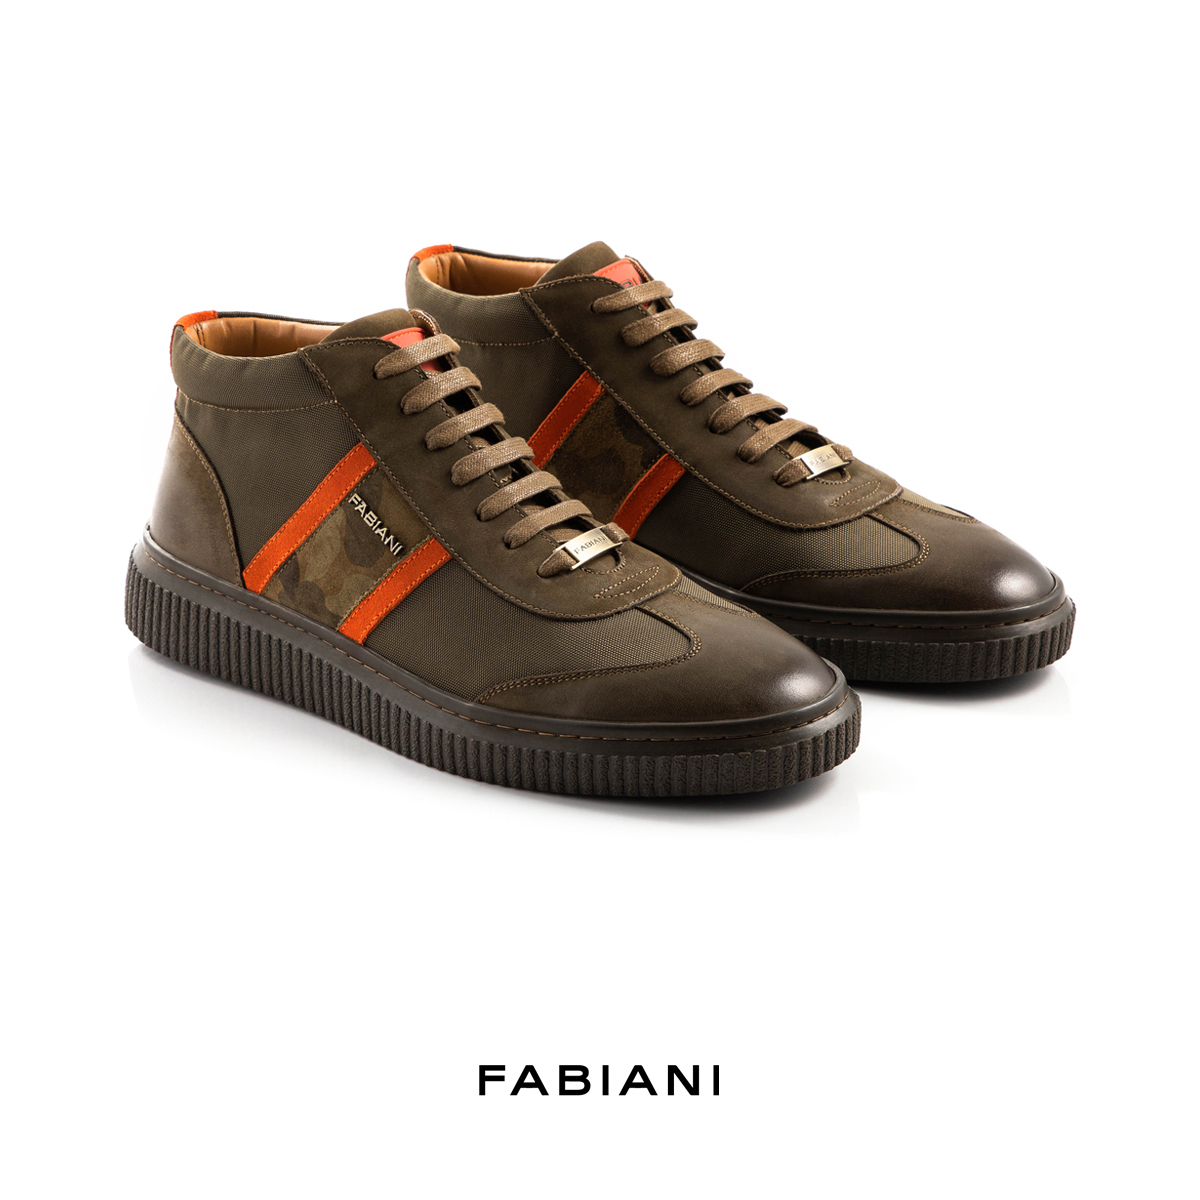 fabiani sneakers and prices